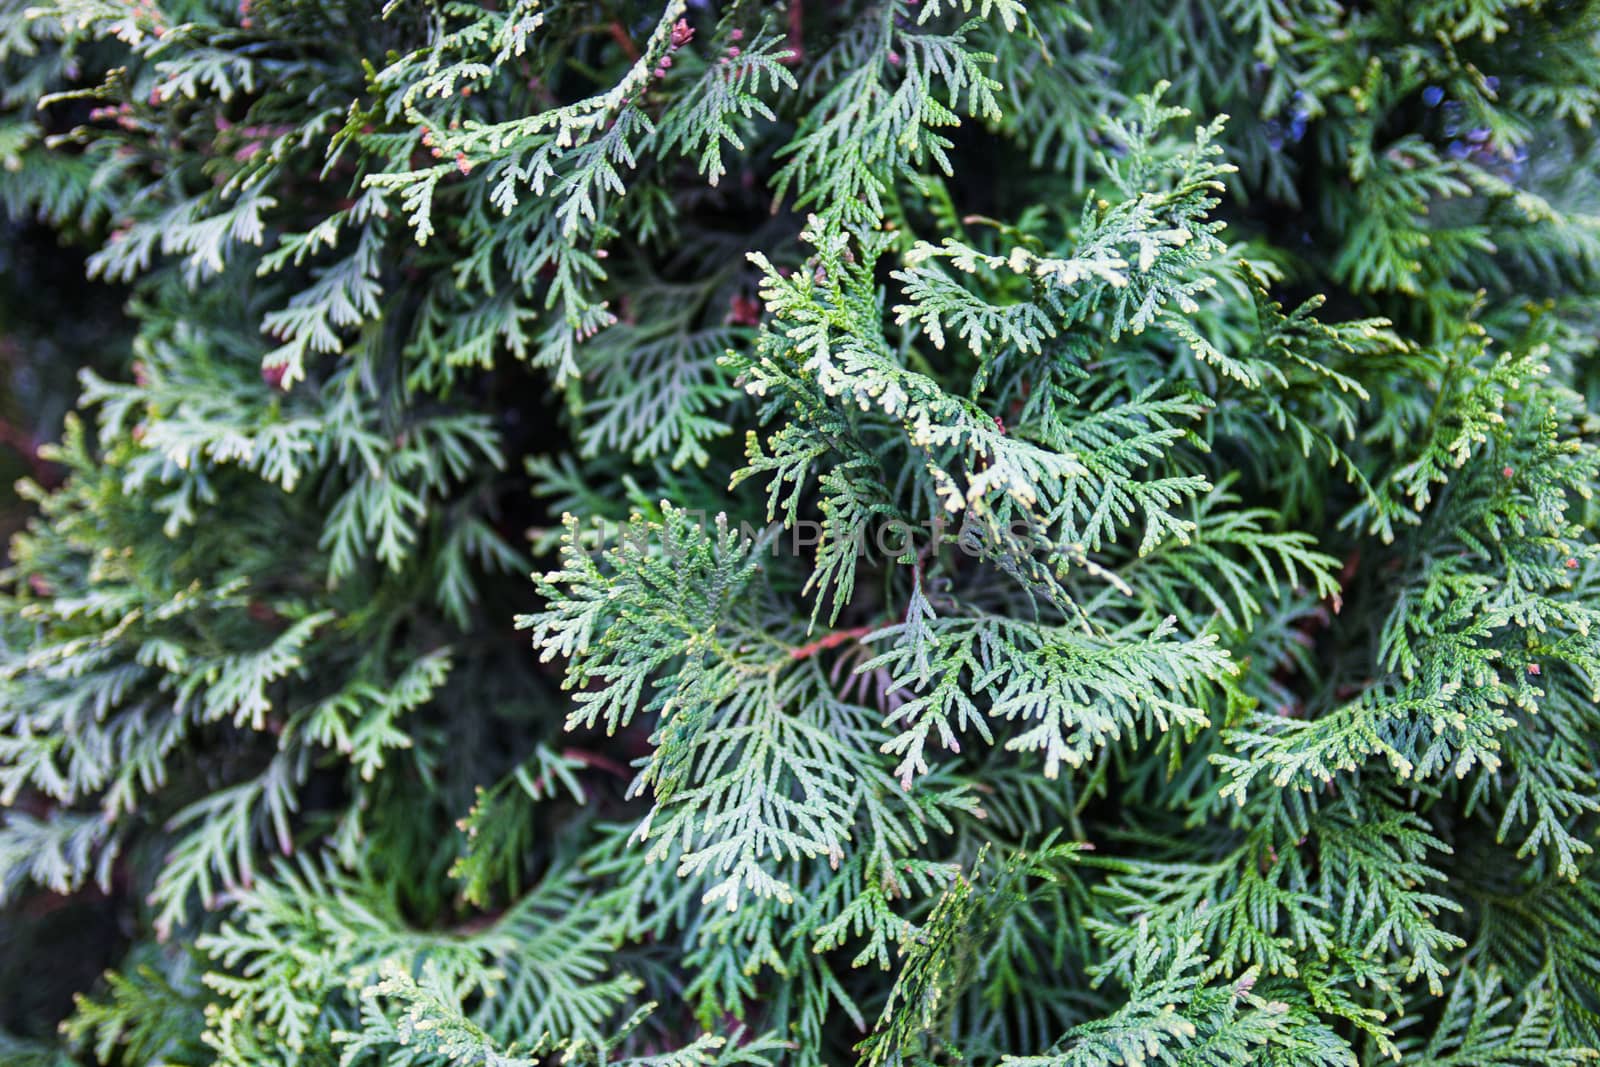 Branches of juniper, the evergreen coniferous plant with scale-like leaves.